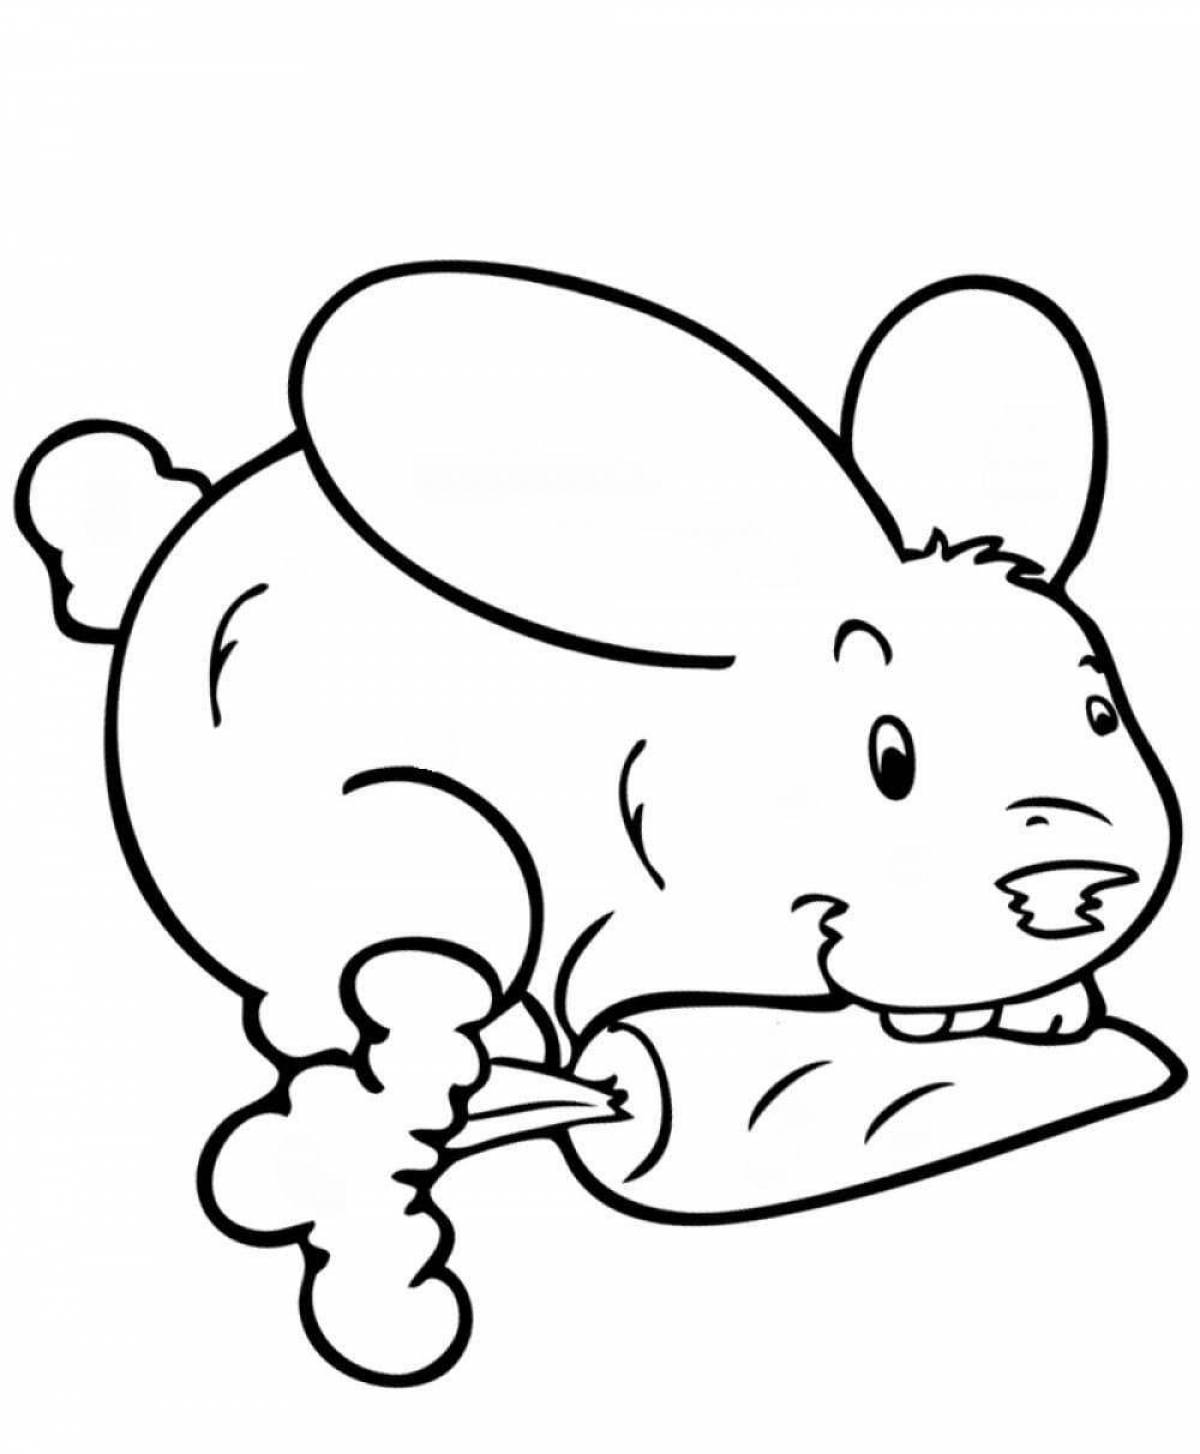 Coloring page holiday rabbit with carrots